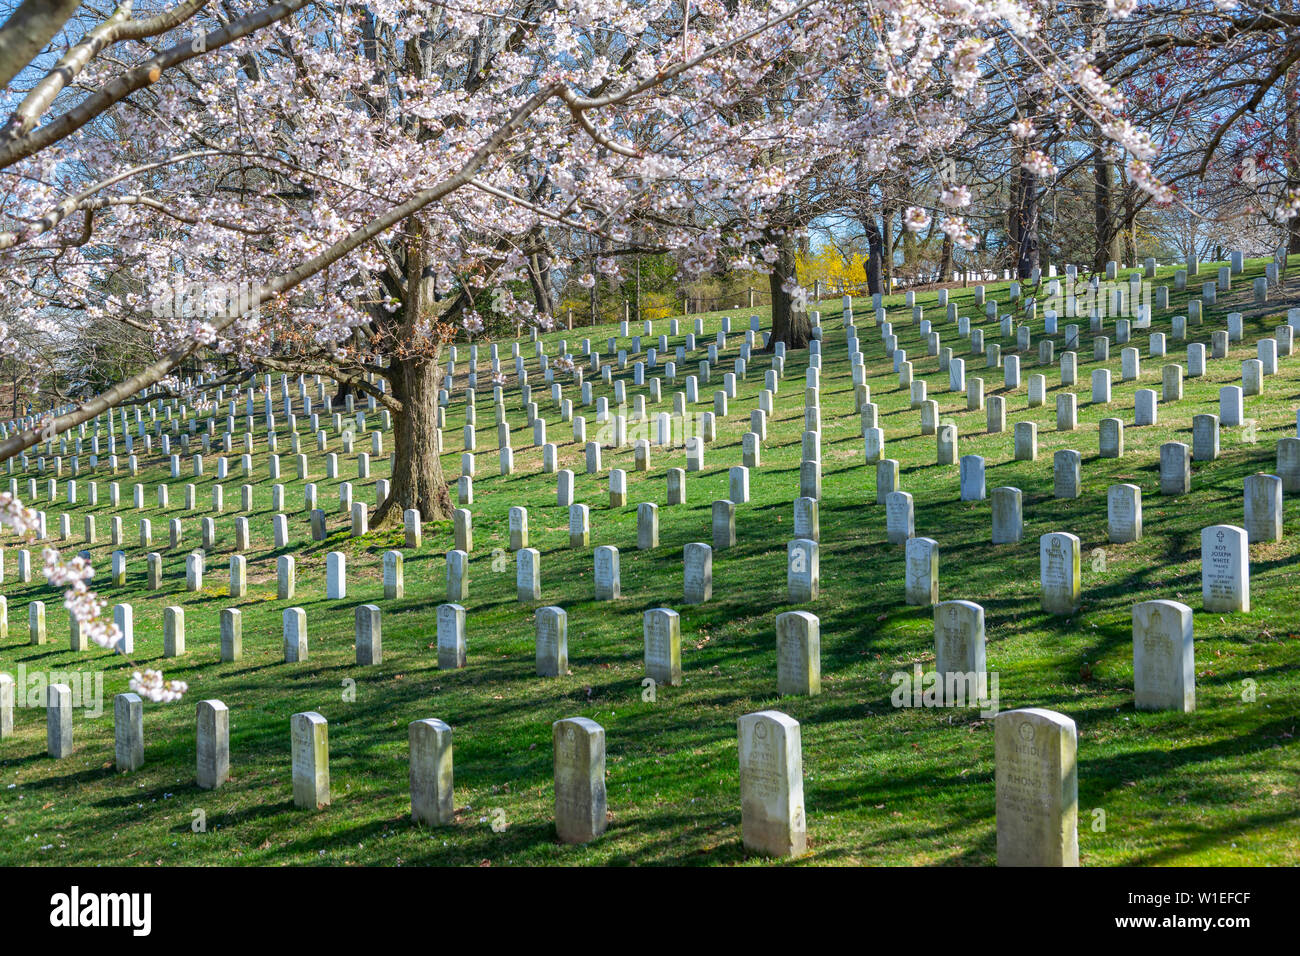 View of gravestones in Arlington National Cemetery in springtime, Washington D.C., United States of America, North America Stock Photo